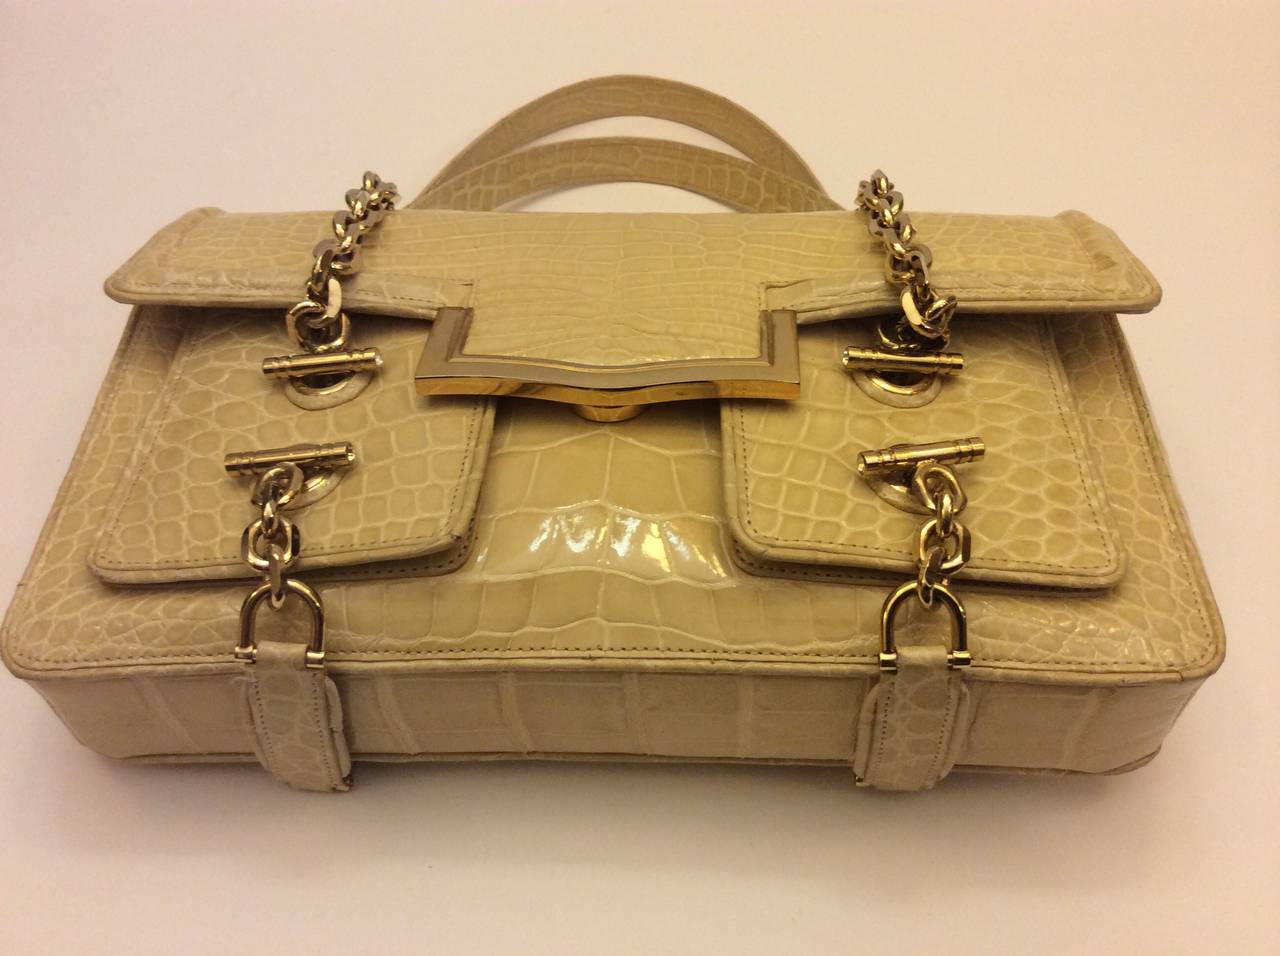 This is a stunning Judith Leiber buttercream crocodile flap handbag with two exterior front pockets. Gold heavy toggle chains with crystal cabochon. 
Two crocodile handles.  Exterior back slot pocket compartment. Hot pink suede leather interior